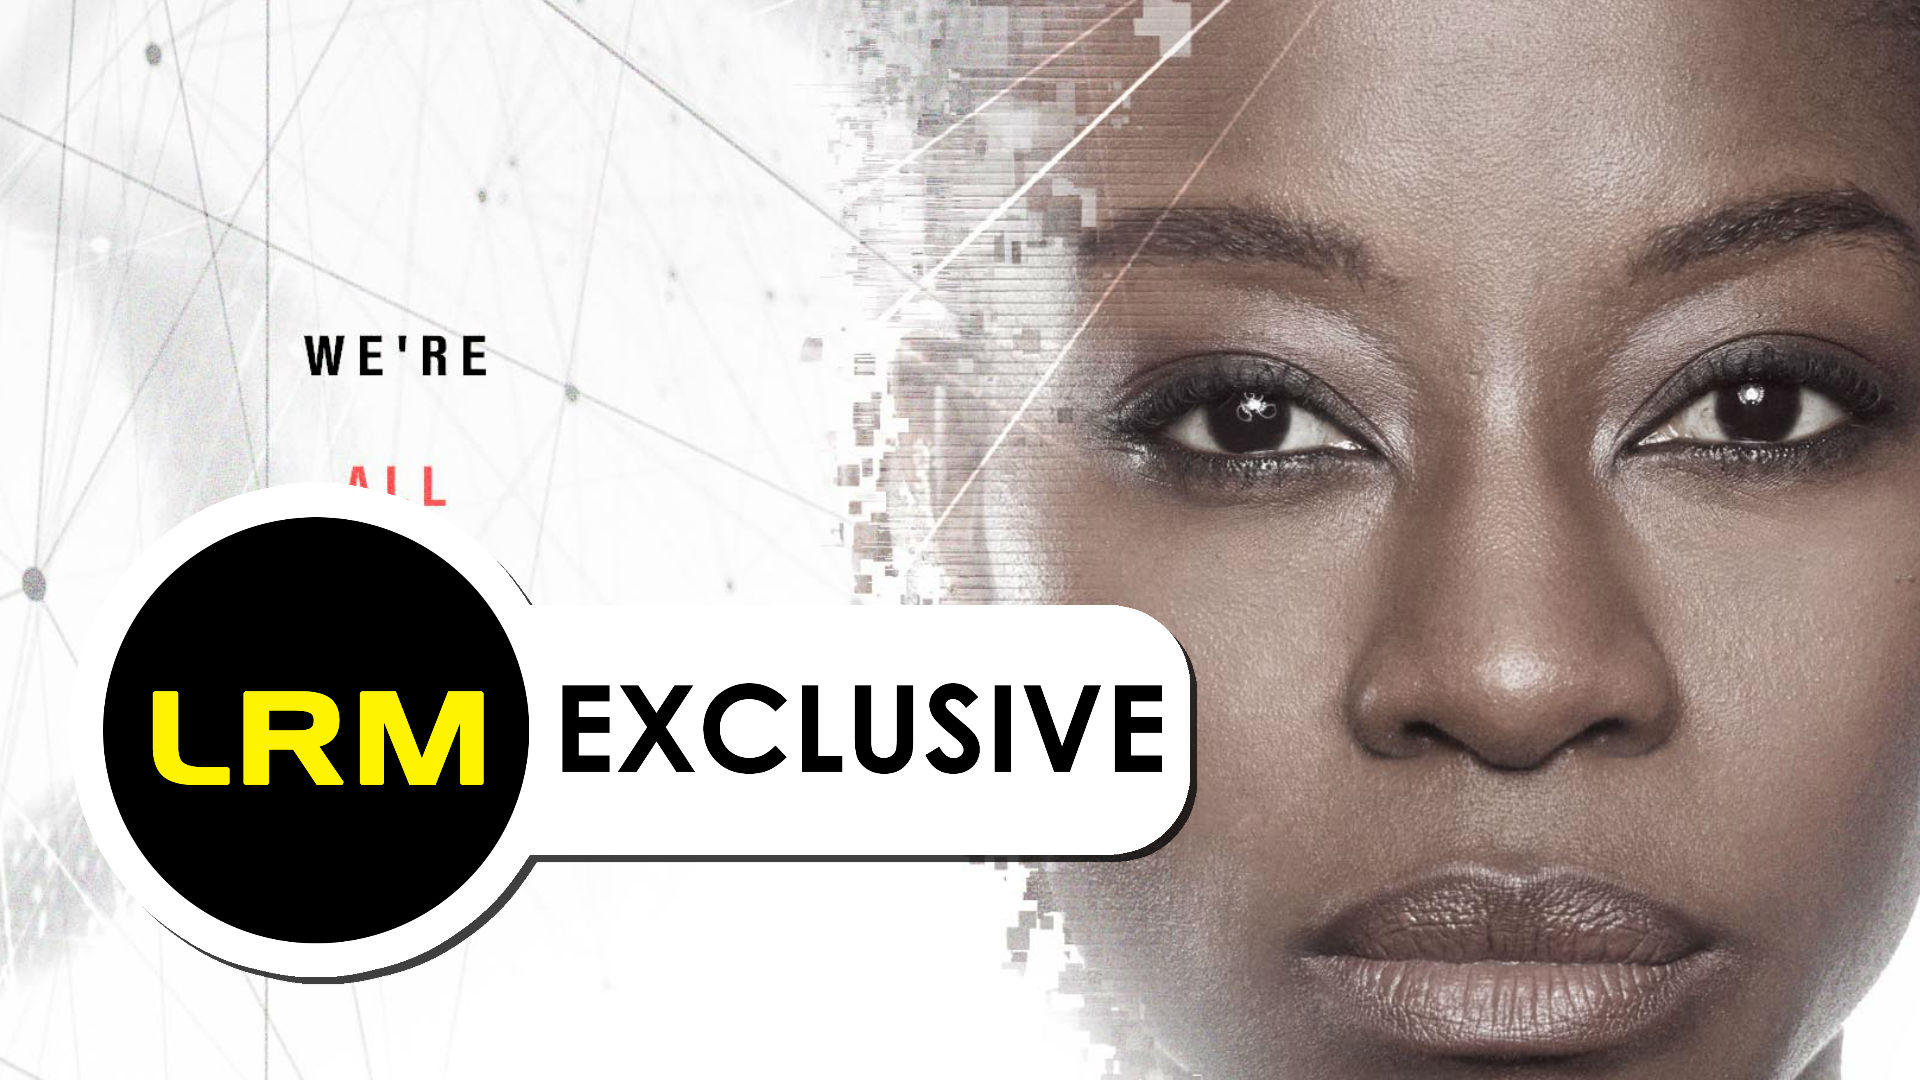 LRM EXCLUSIVE: Dark/Web Poster Reveals Lost In Space’s Sibongile Mlambo, Tickets Available Now!